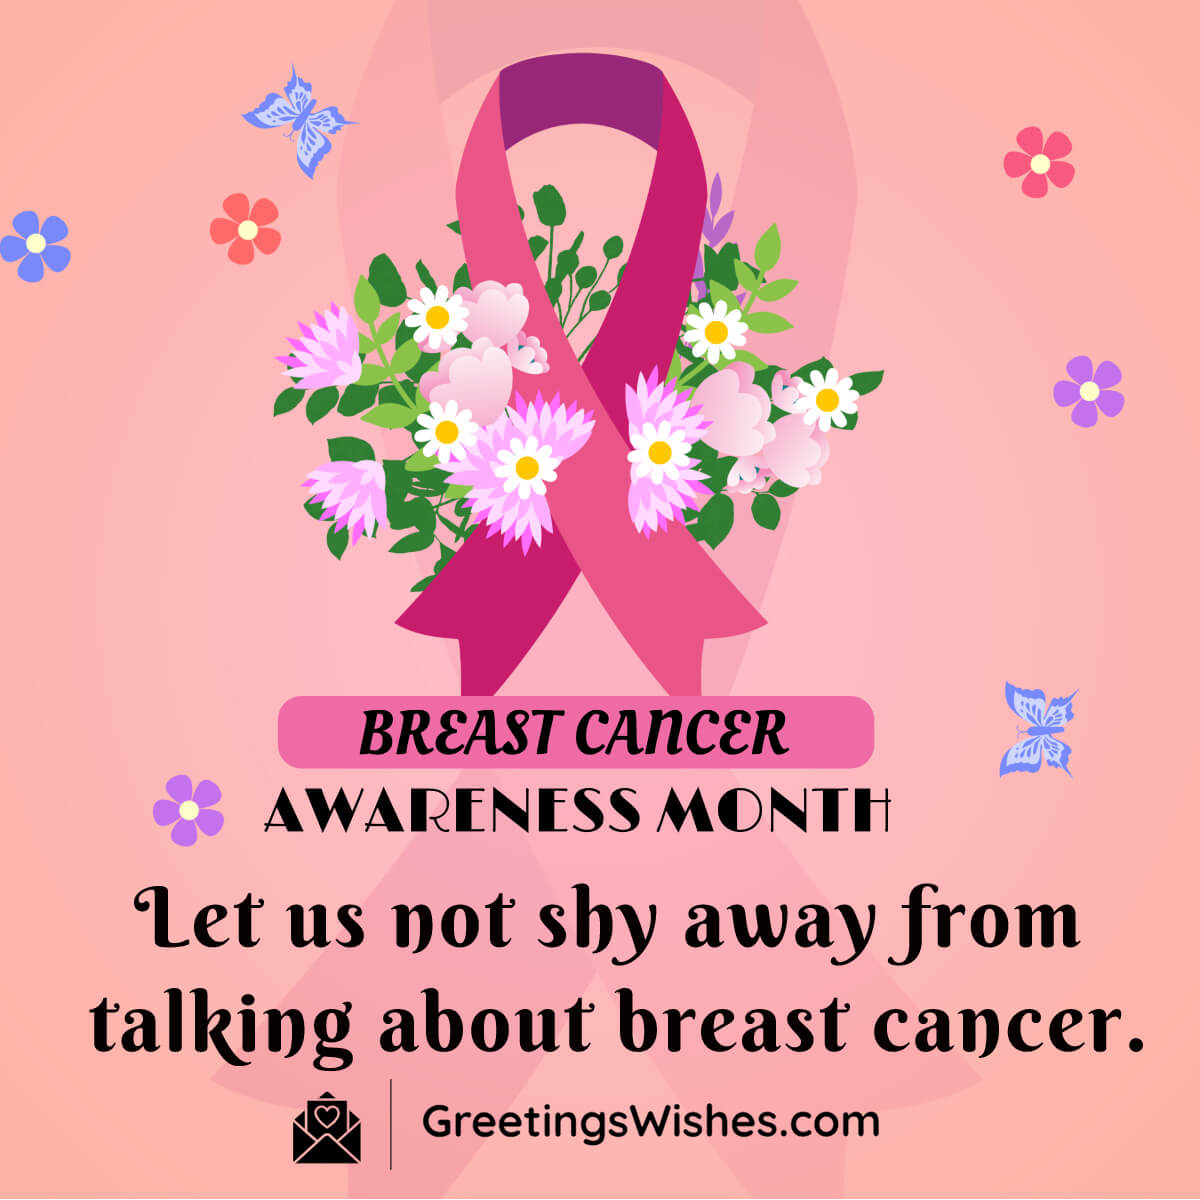 World Breast Cancer Day Greetings